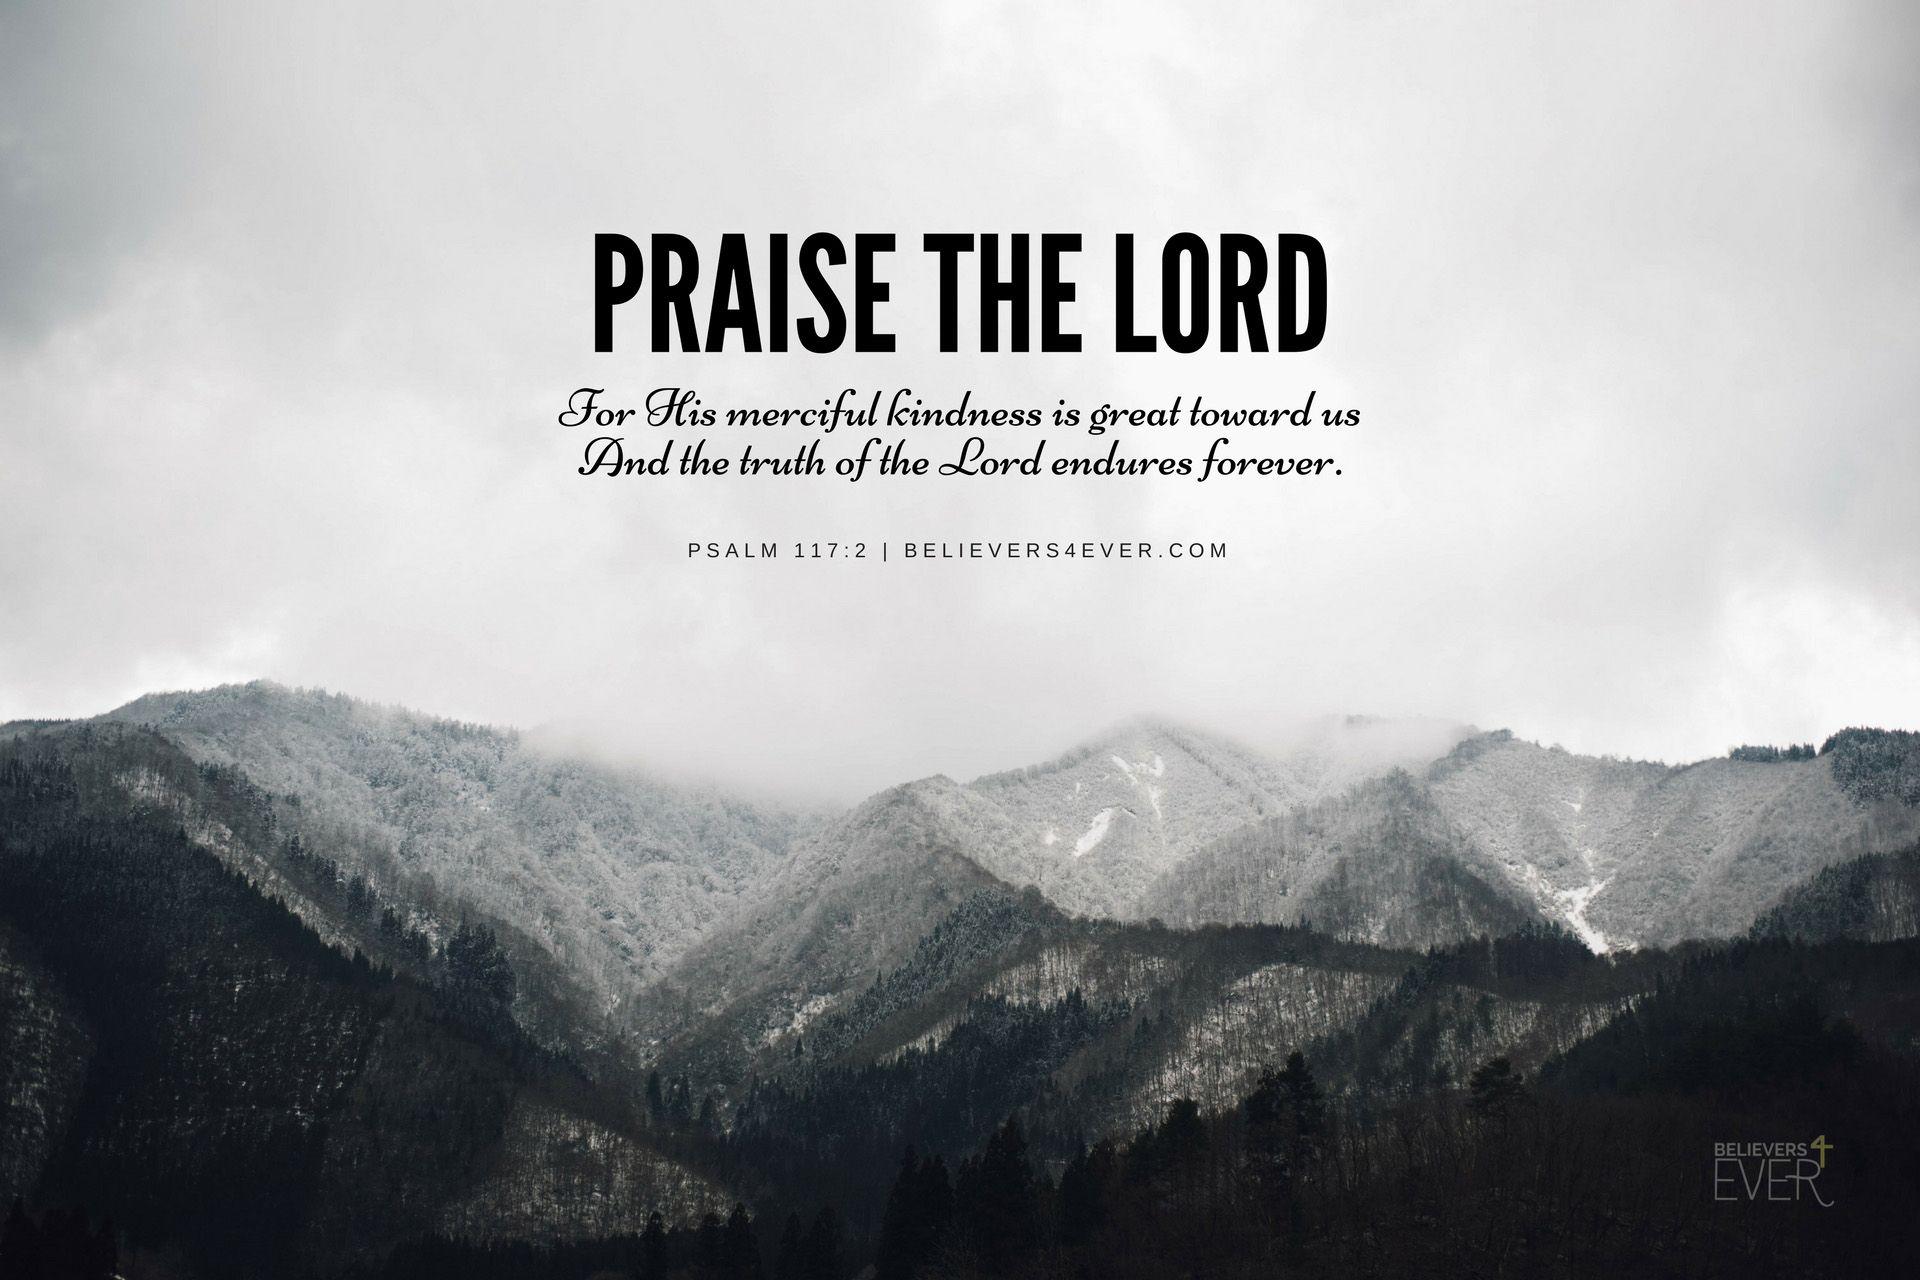 Praise the Lord.com. Bible quotes, Christian wallpaper, Free christian wallpaper